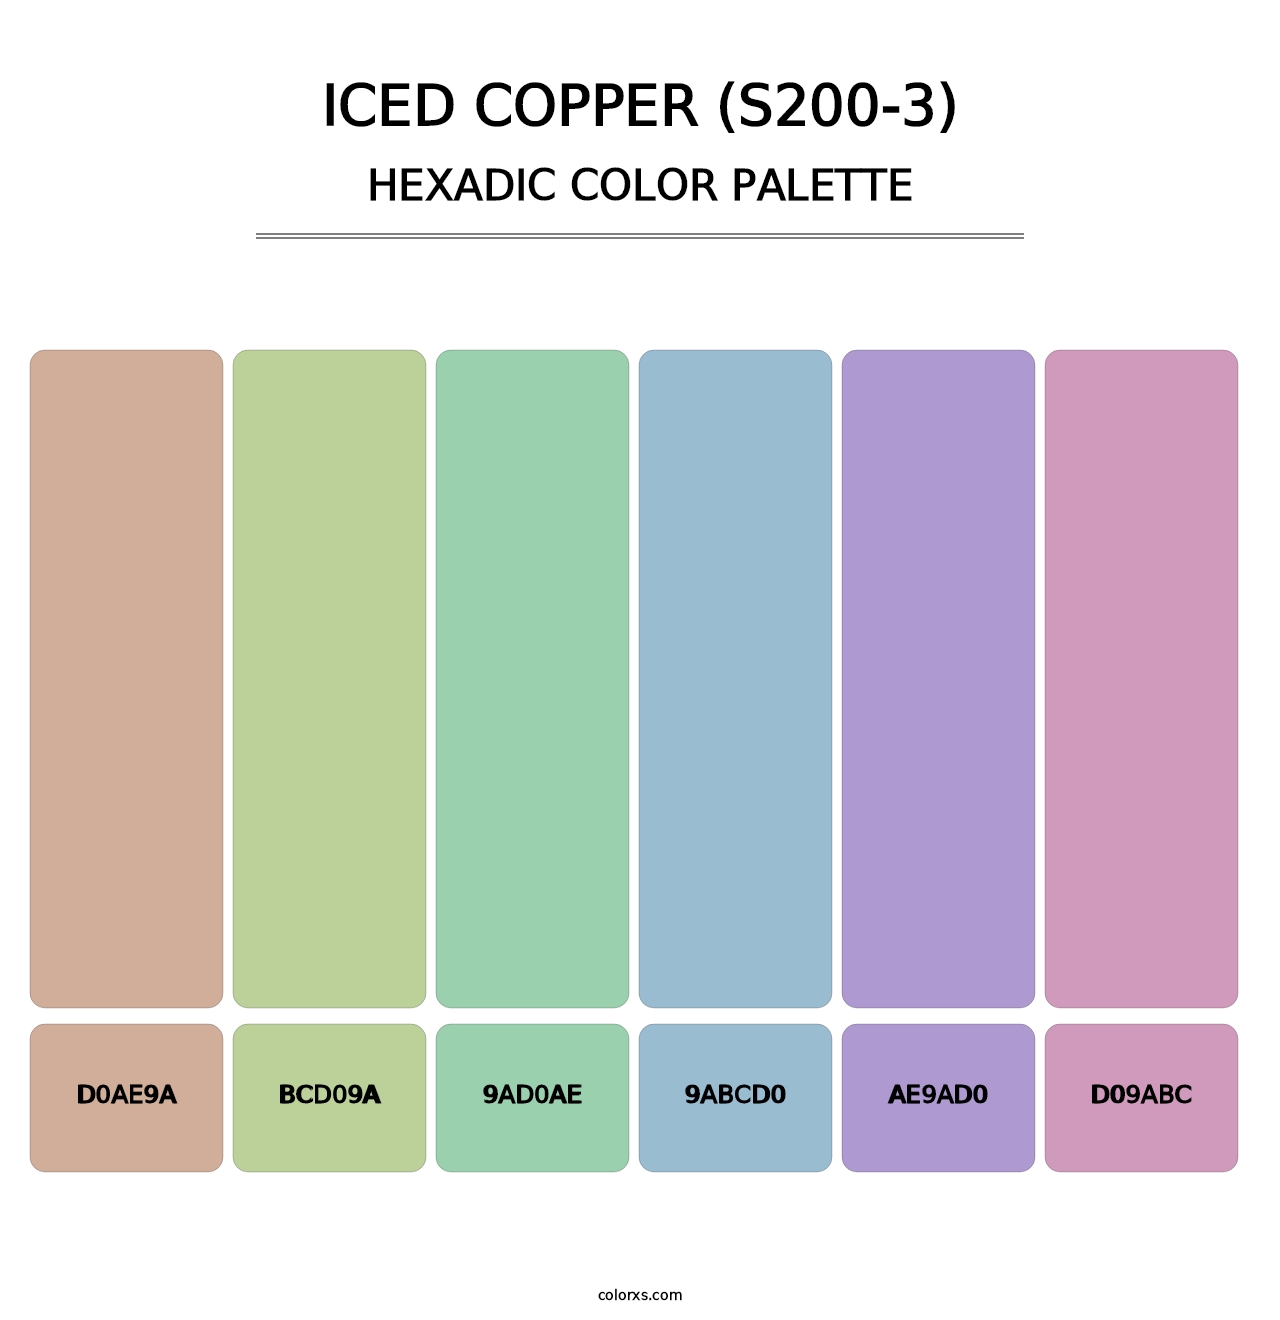 Iced Copper (S200-3) - Hexadic Color Palette